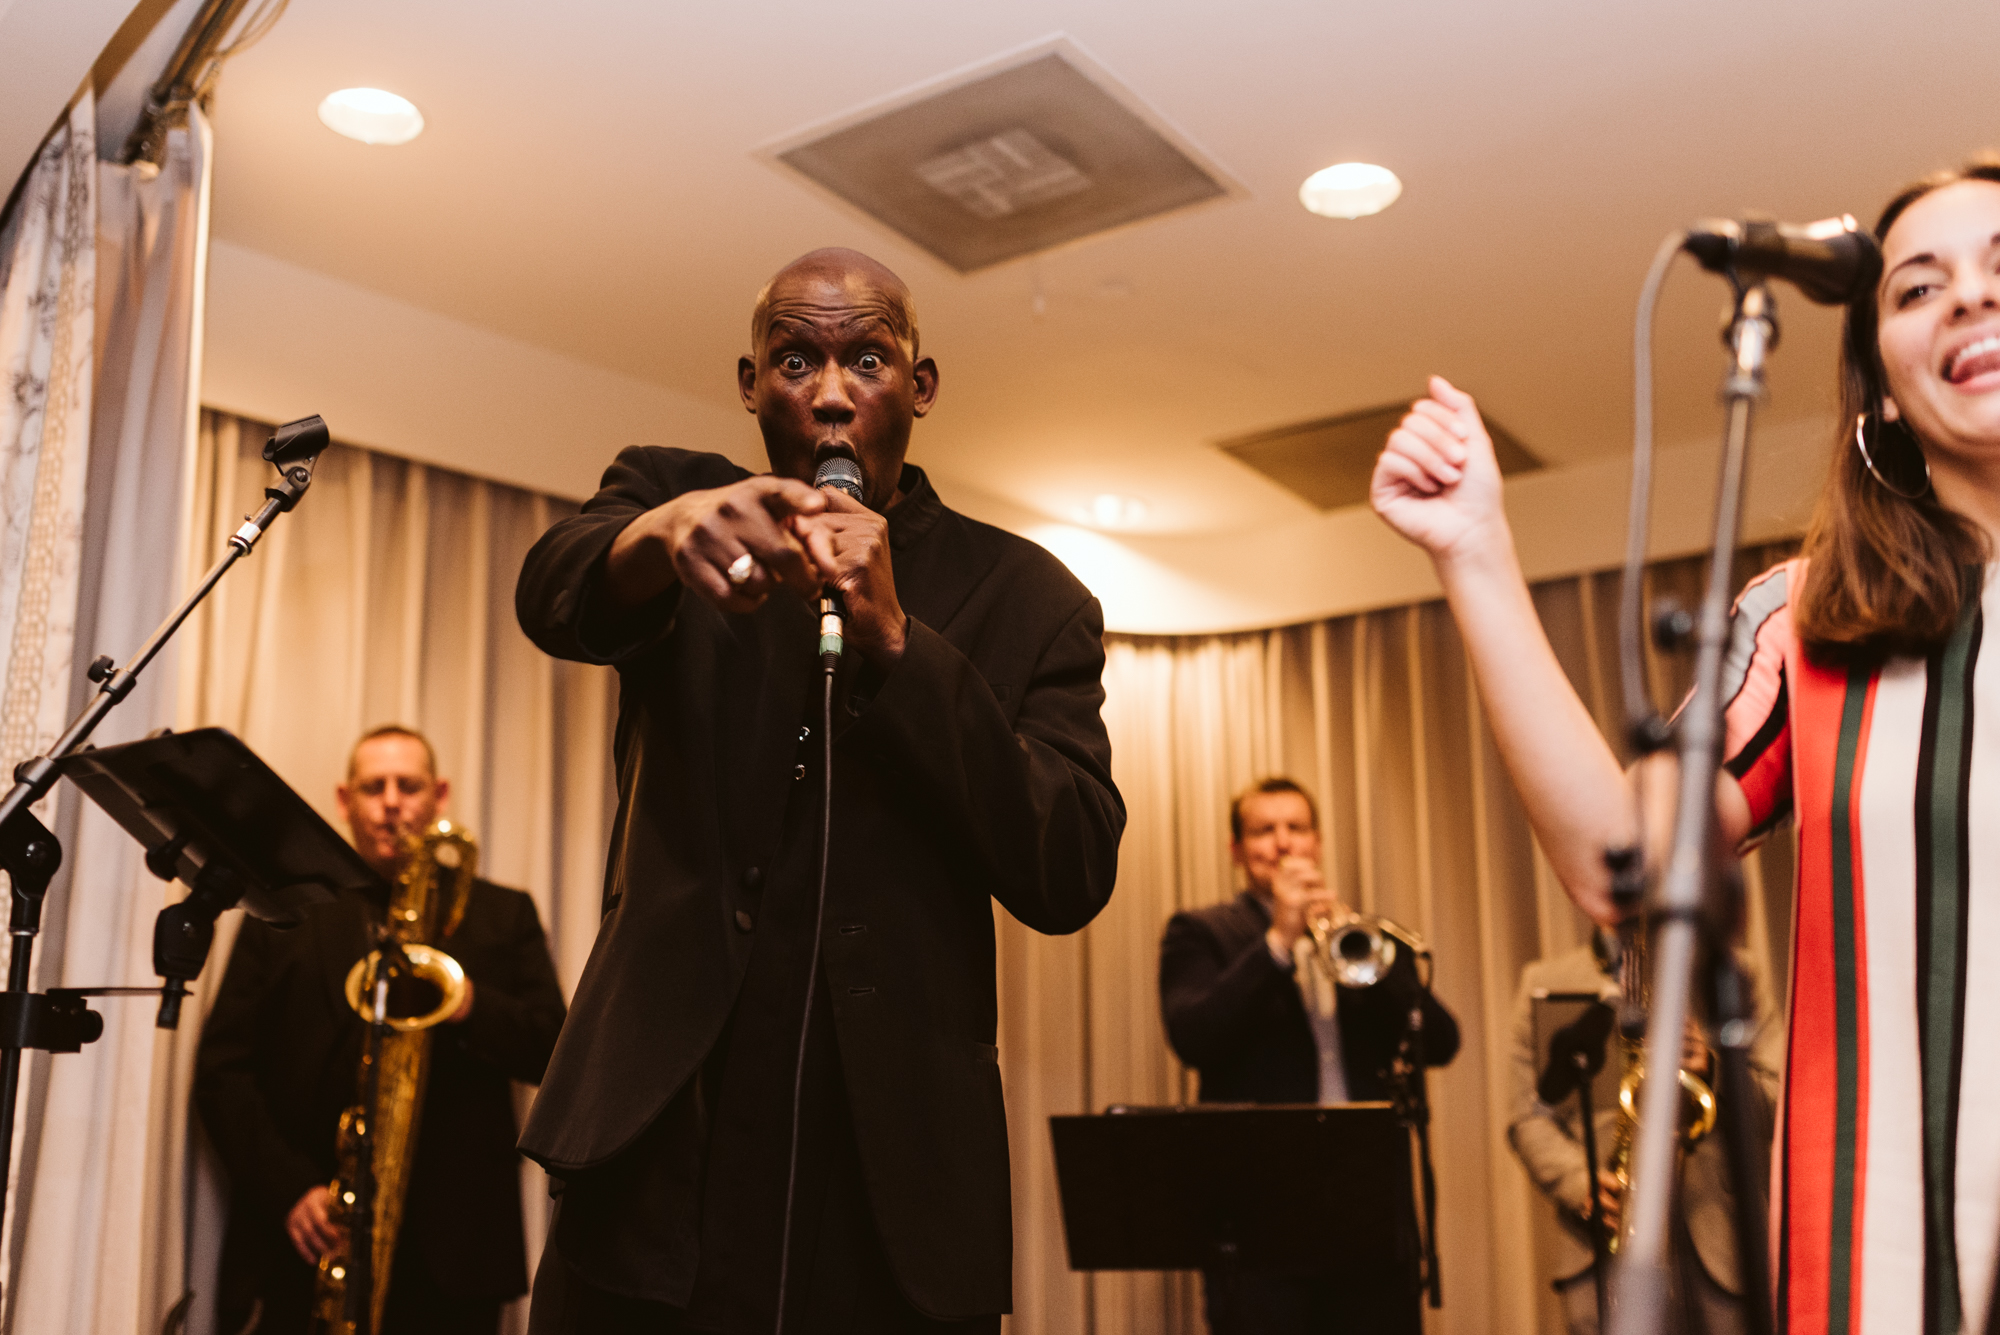 Elegant, Columbia Country Club, Chevy Chase Maryland, Baltimore Wedding Photographer, Classic, Traditional, Bachelor Boys Band Performing, Fun Wedding Band